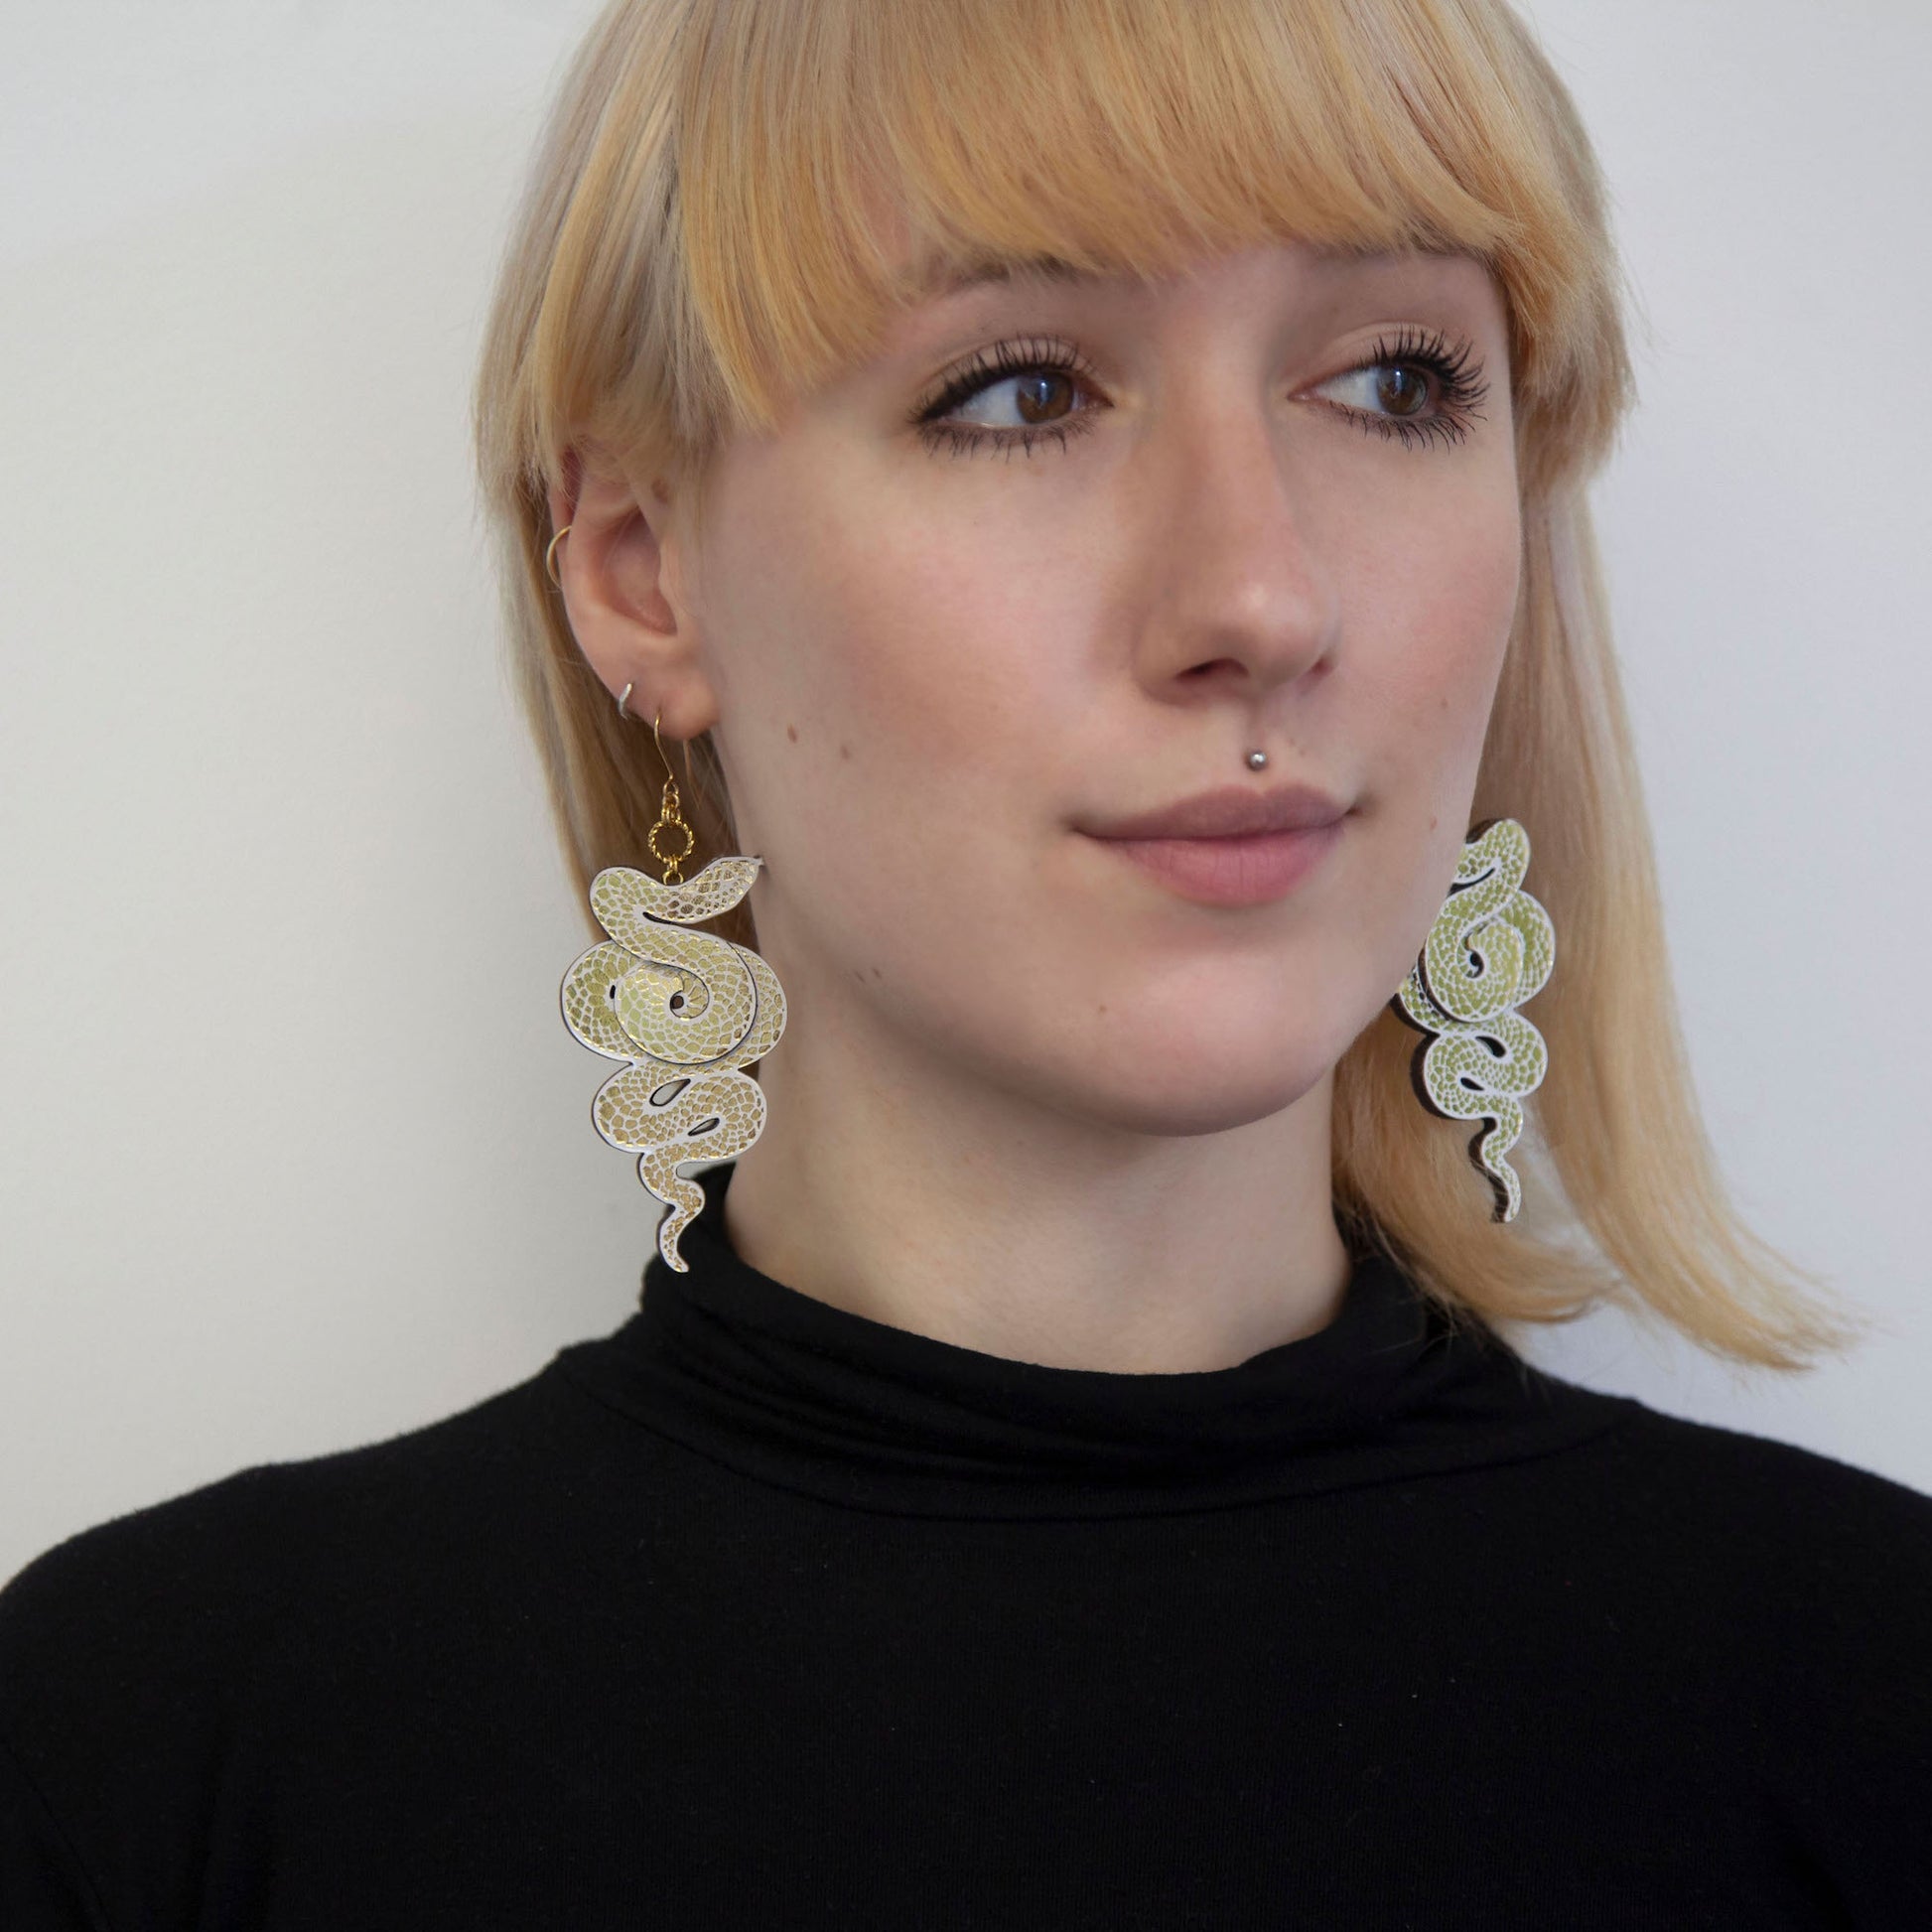 blonde model with whte & gold snake earrings